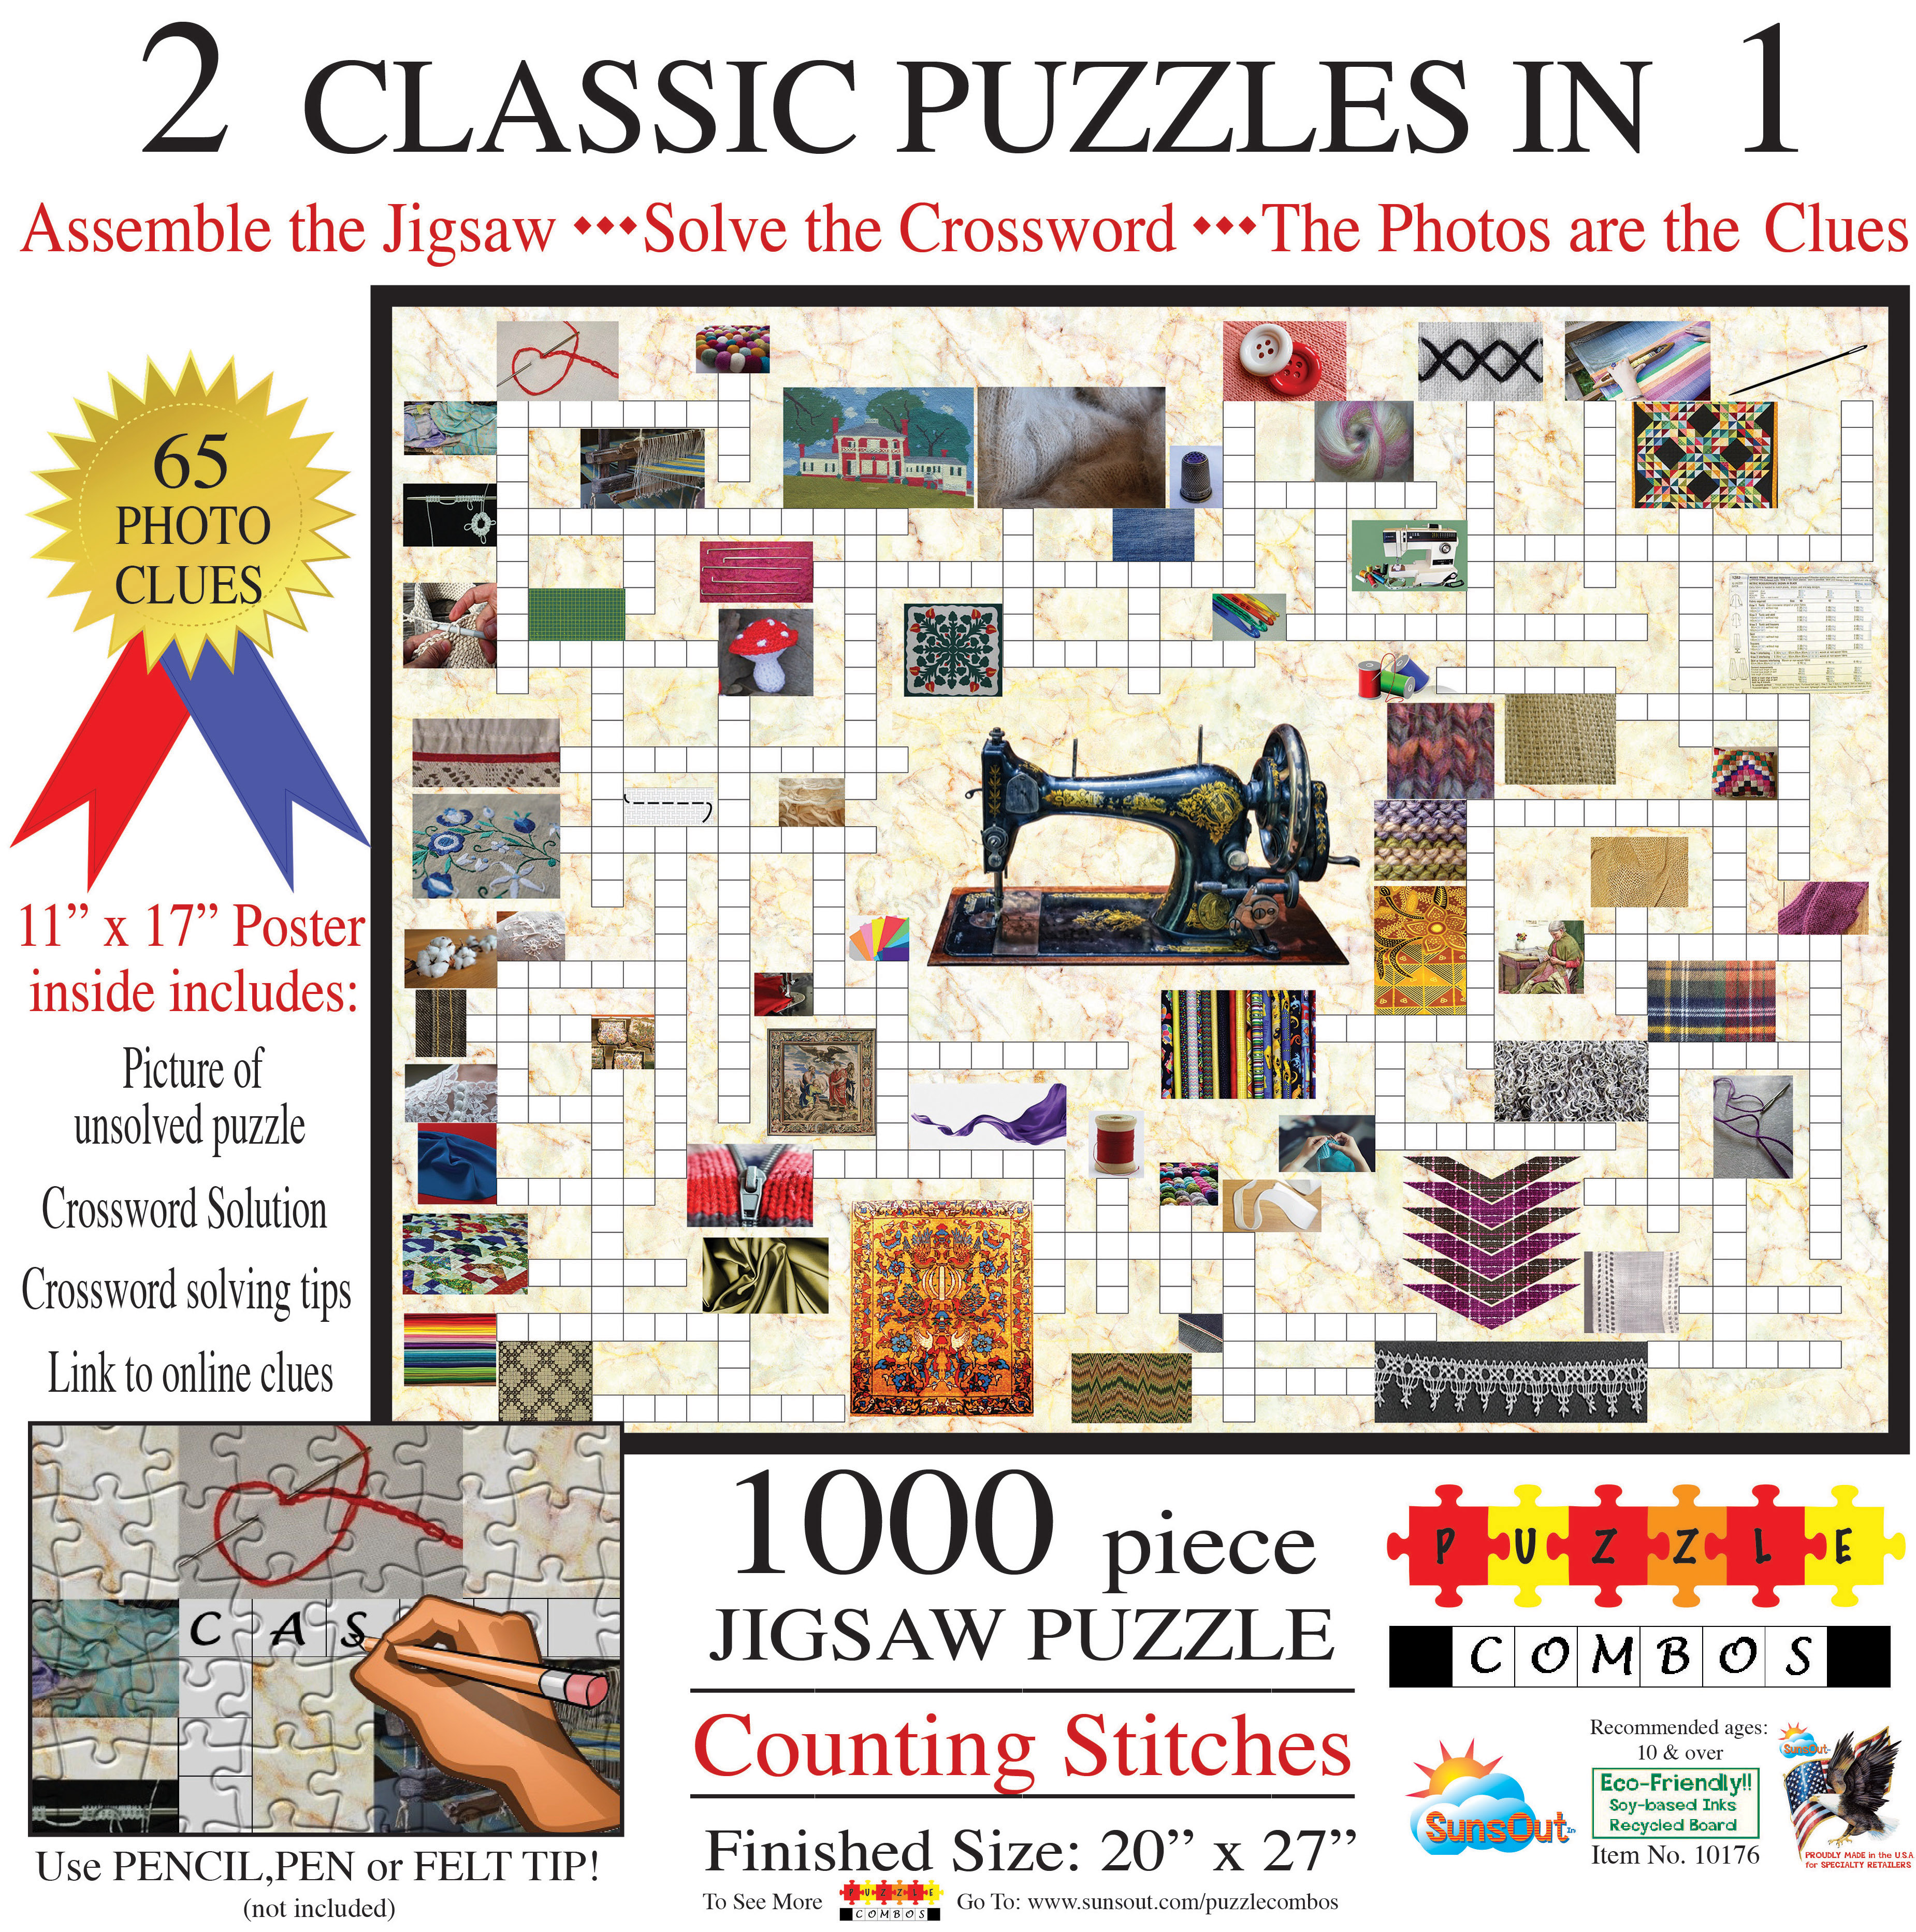 sunsout irv brechner - puzzle combo: counting stitches 1000 teile puzzle -10176